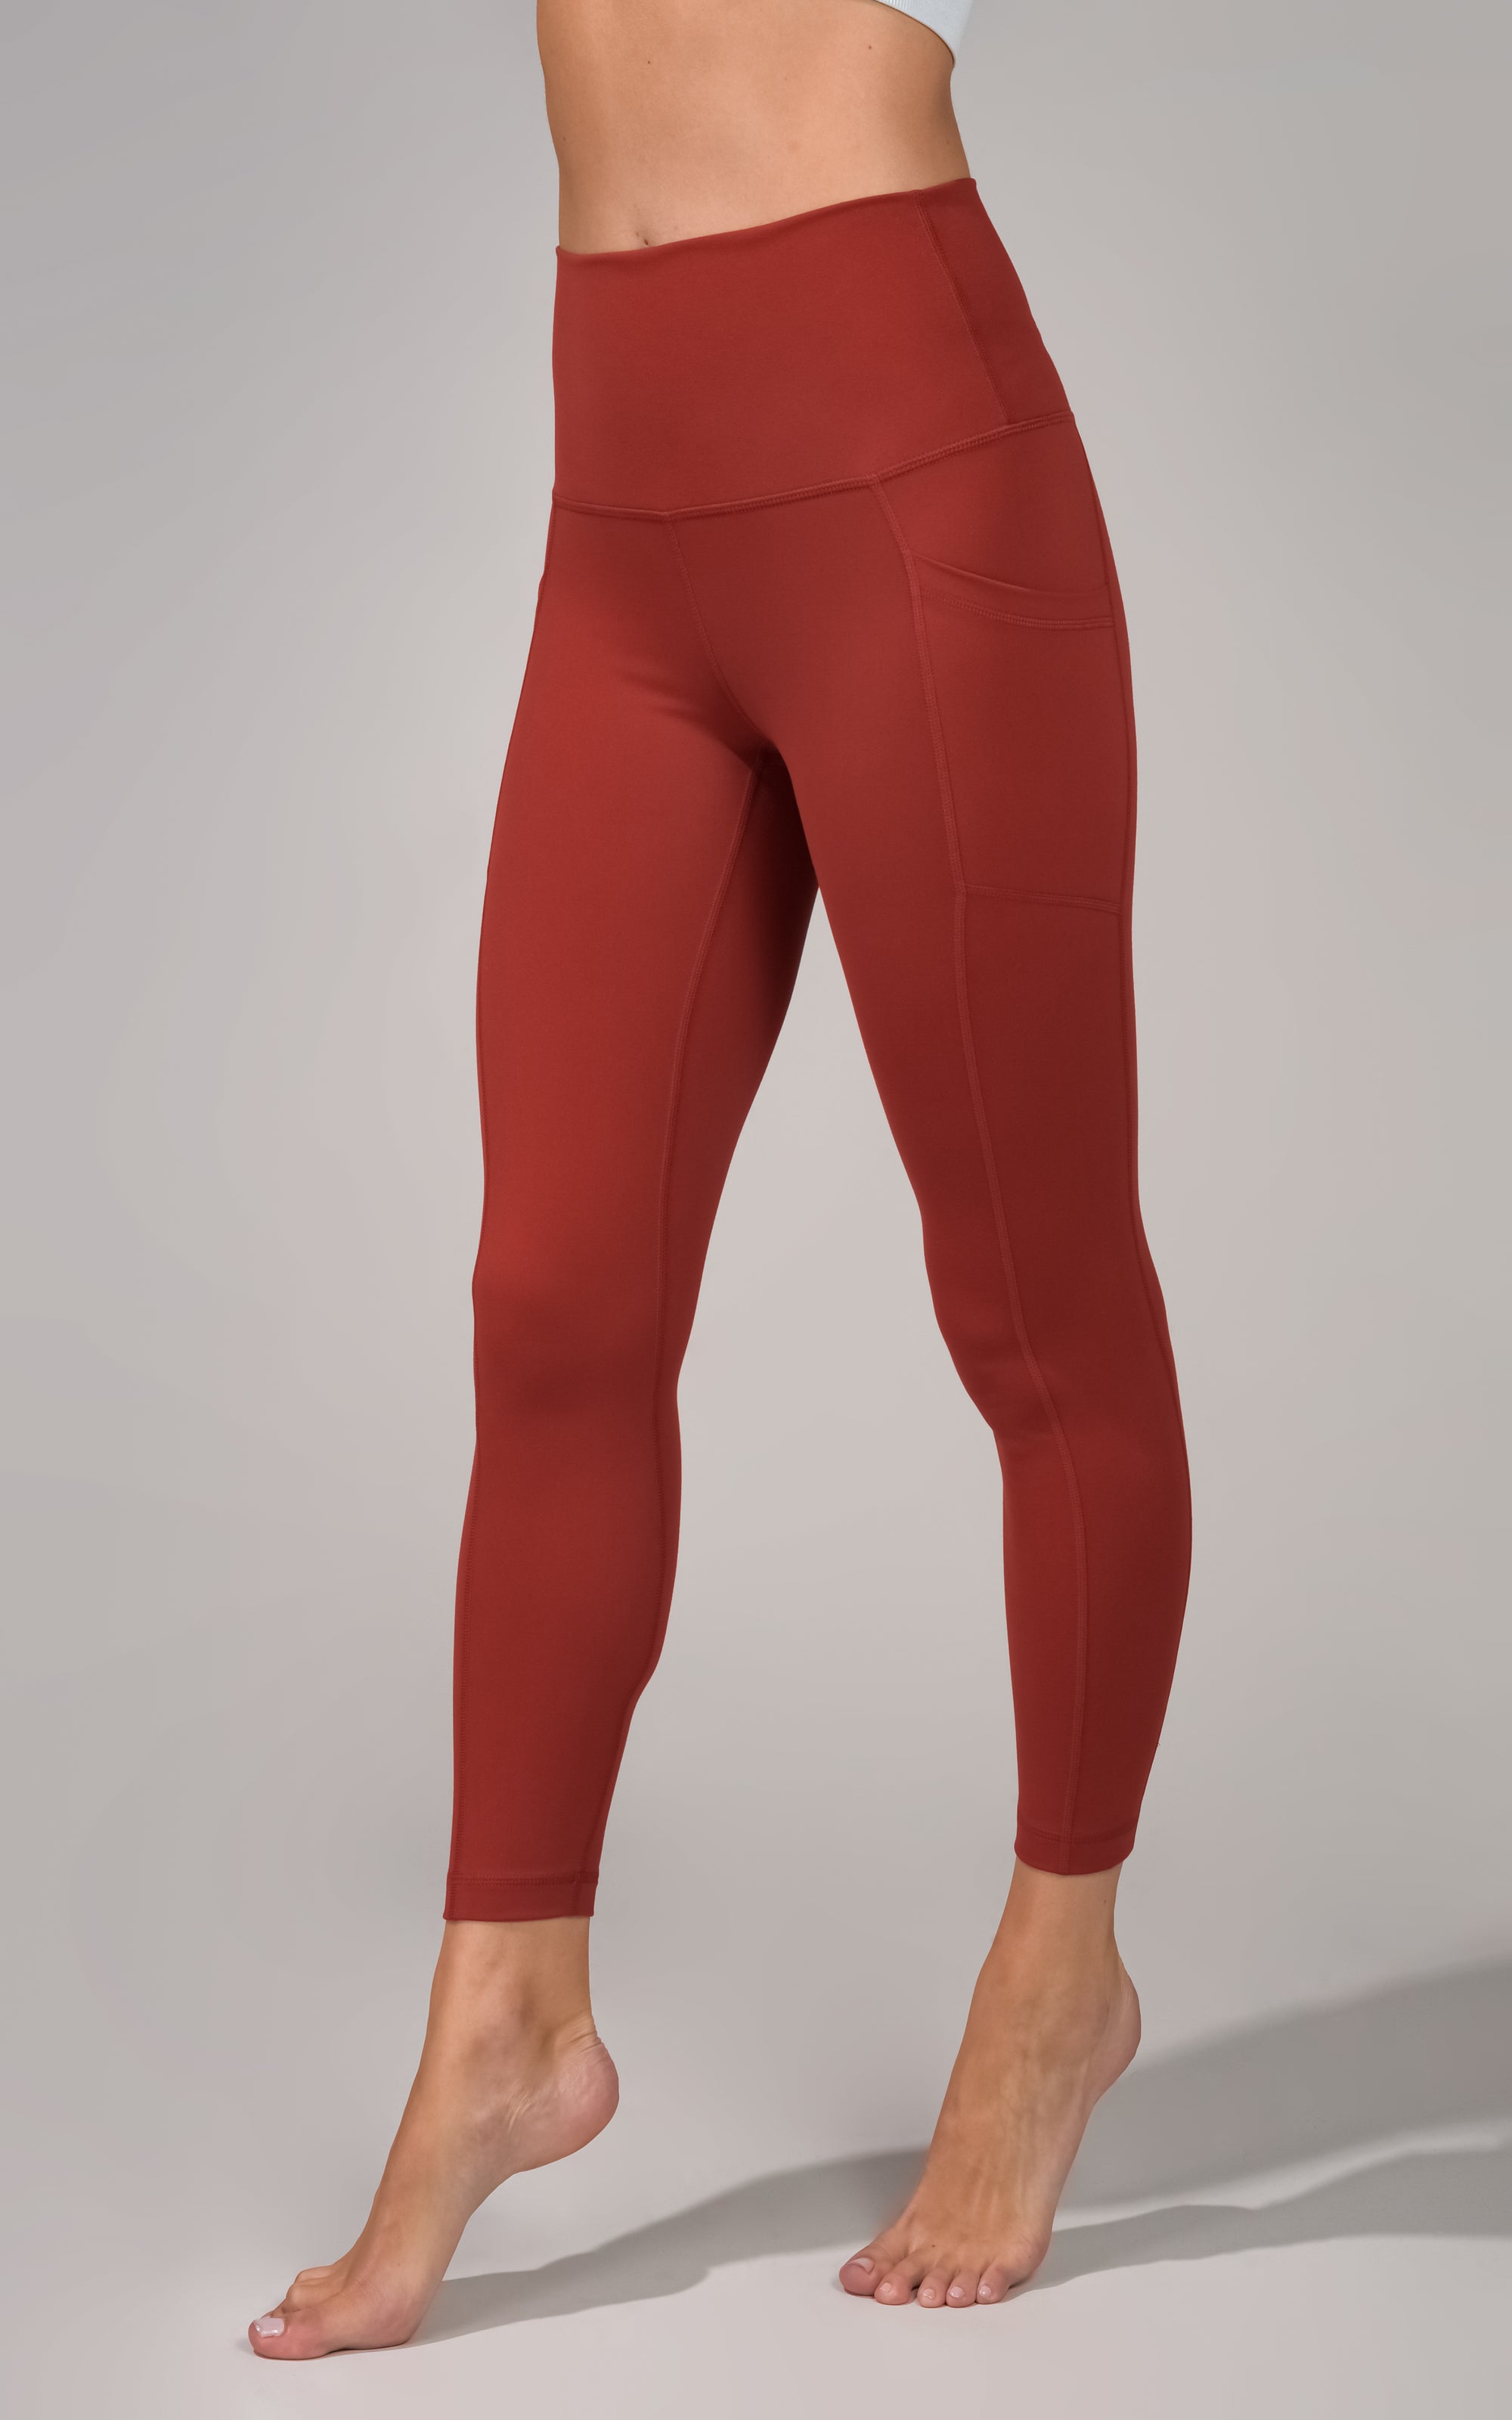 yogalicious lux leggings small - Pioneer Recycling Services